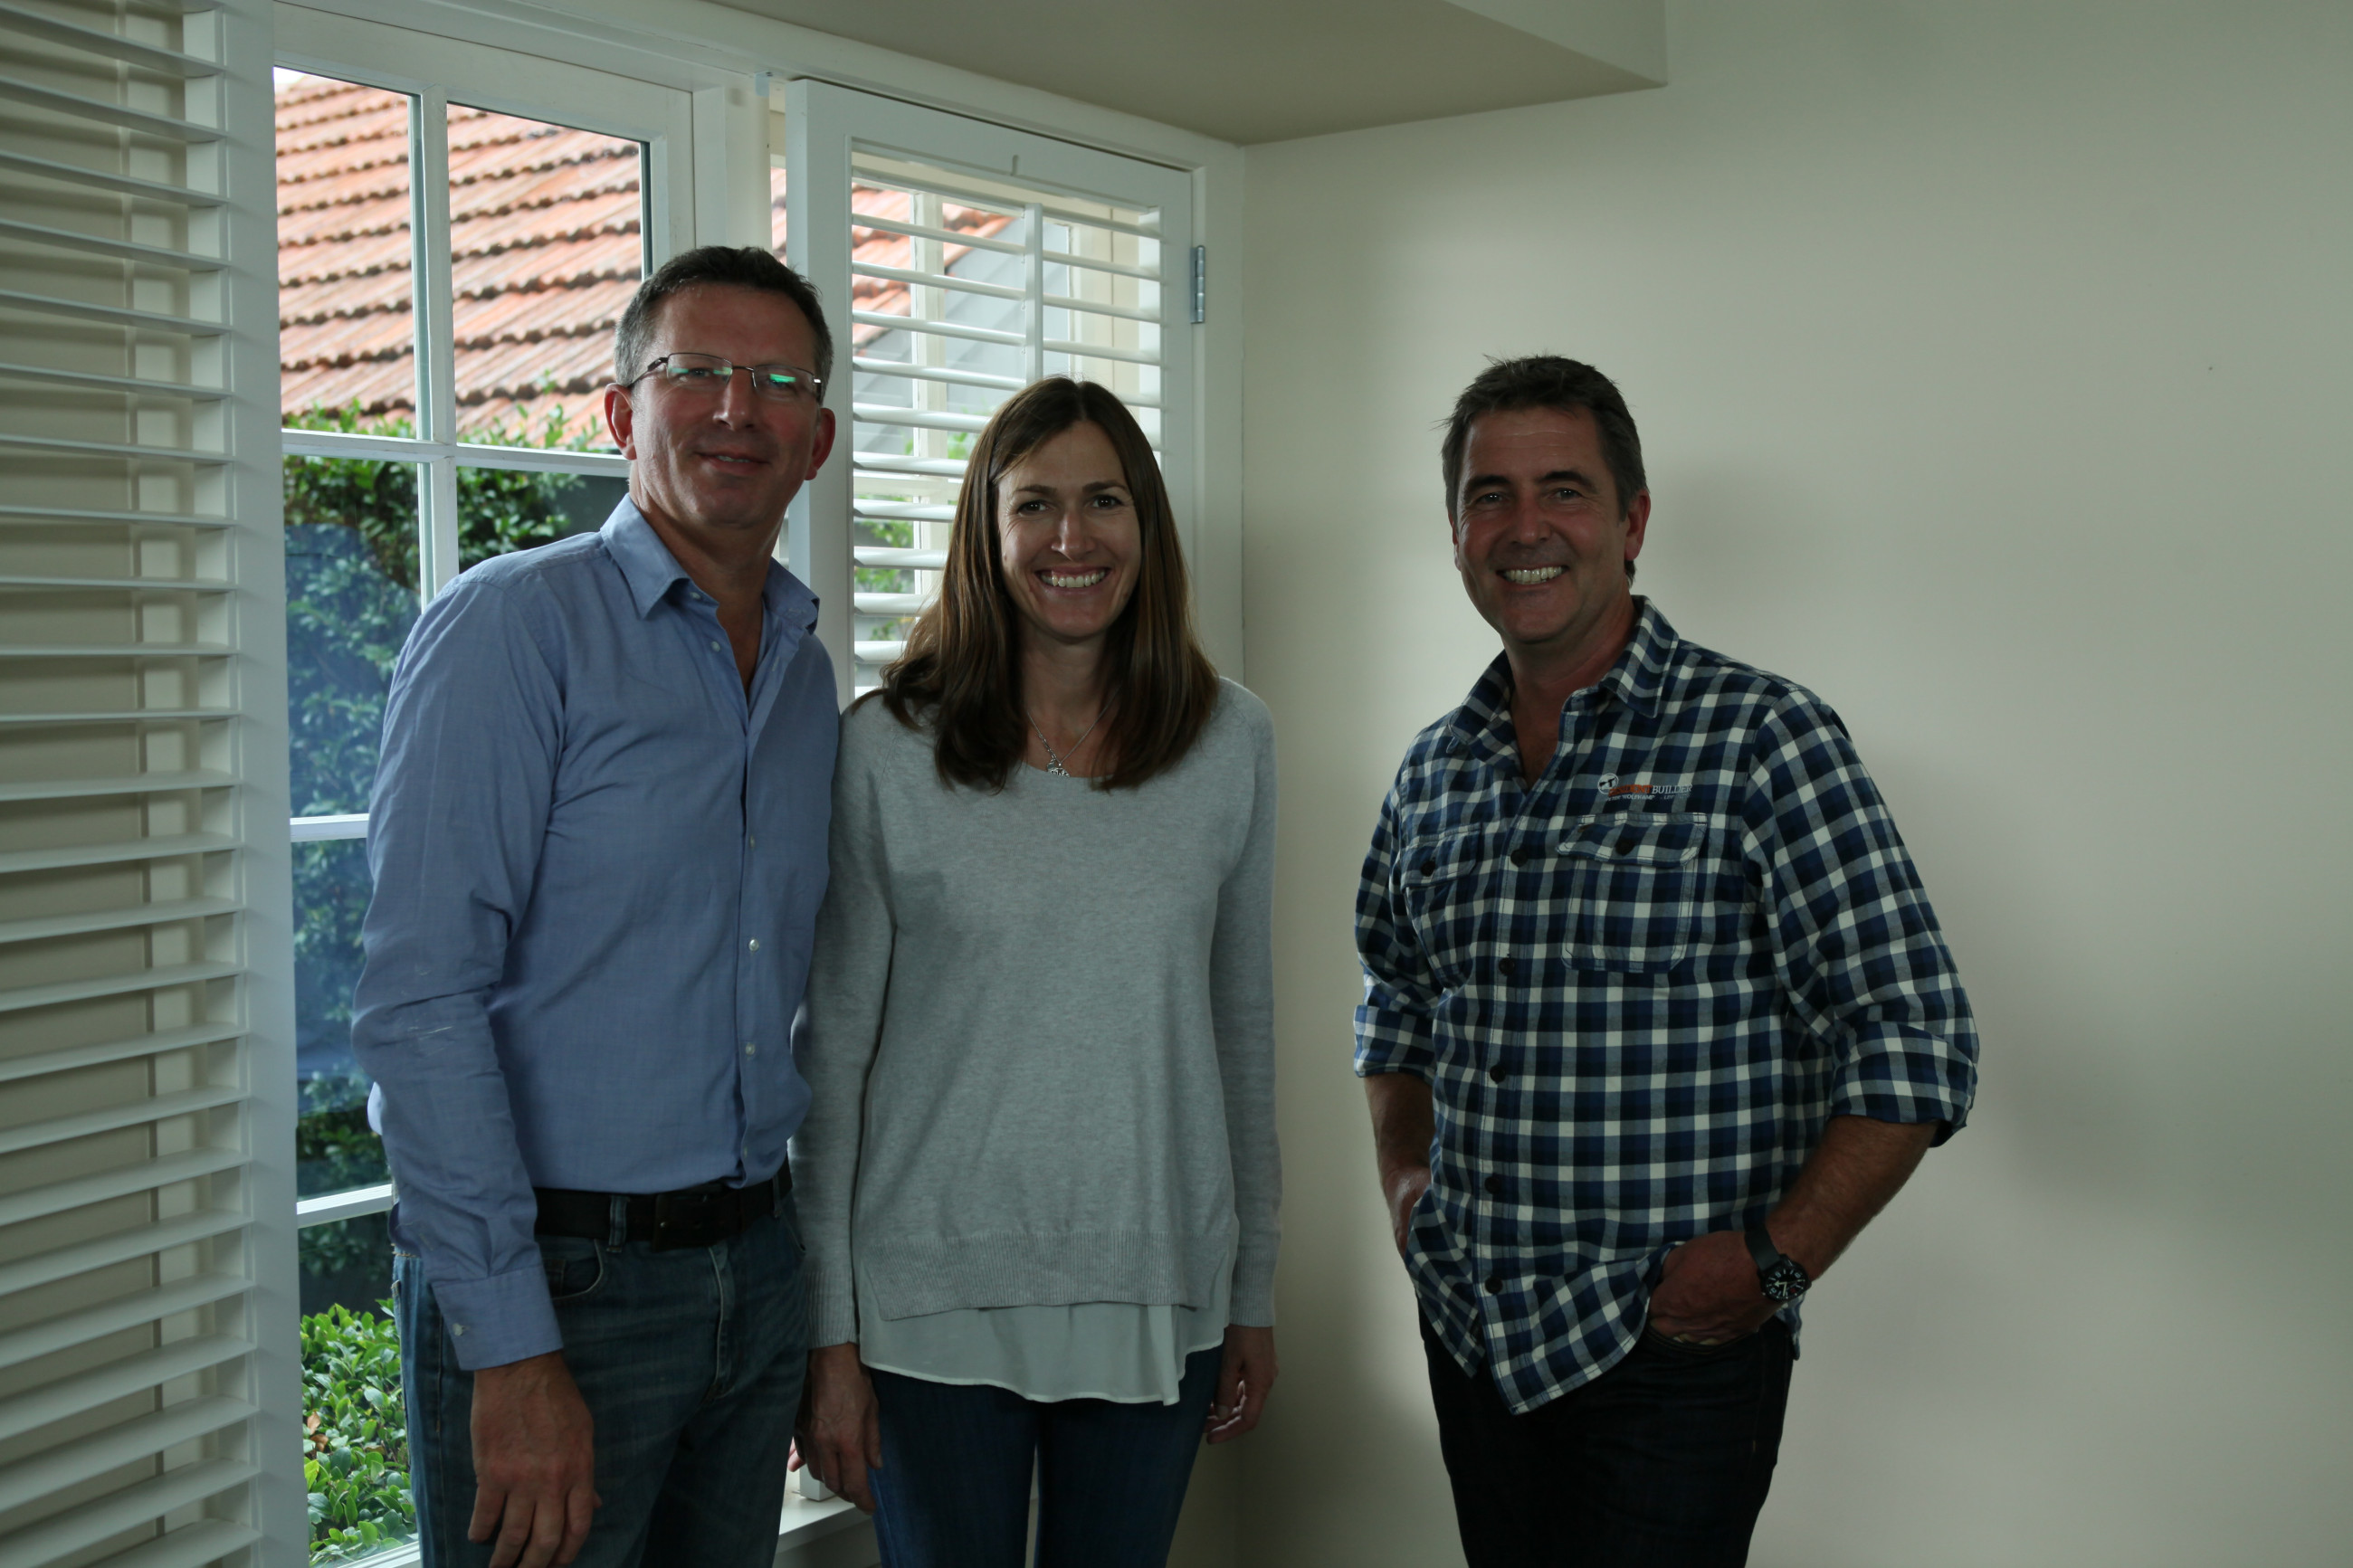 Three people smiling in their home in front of double glazed windows